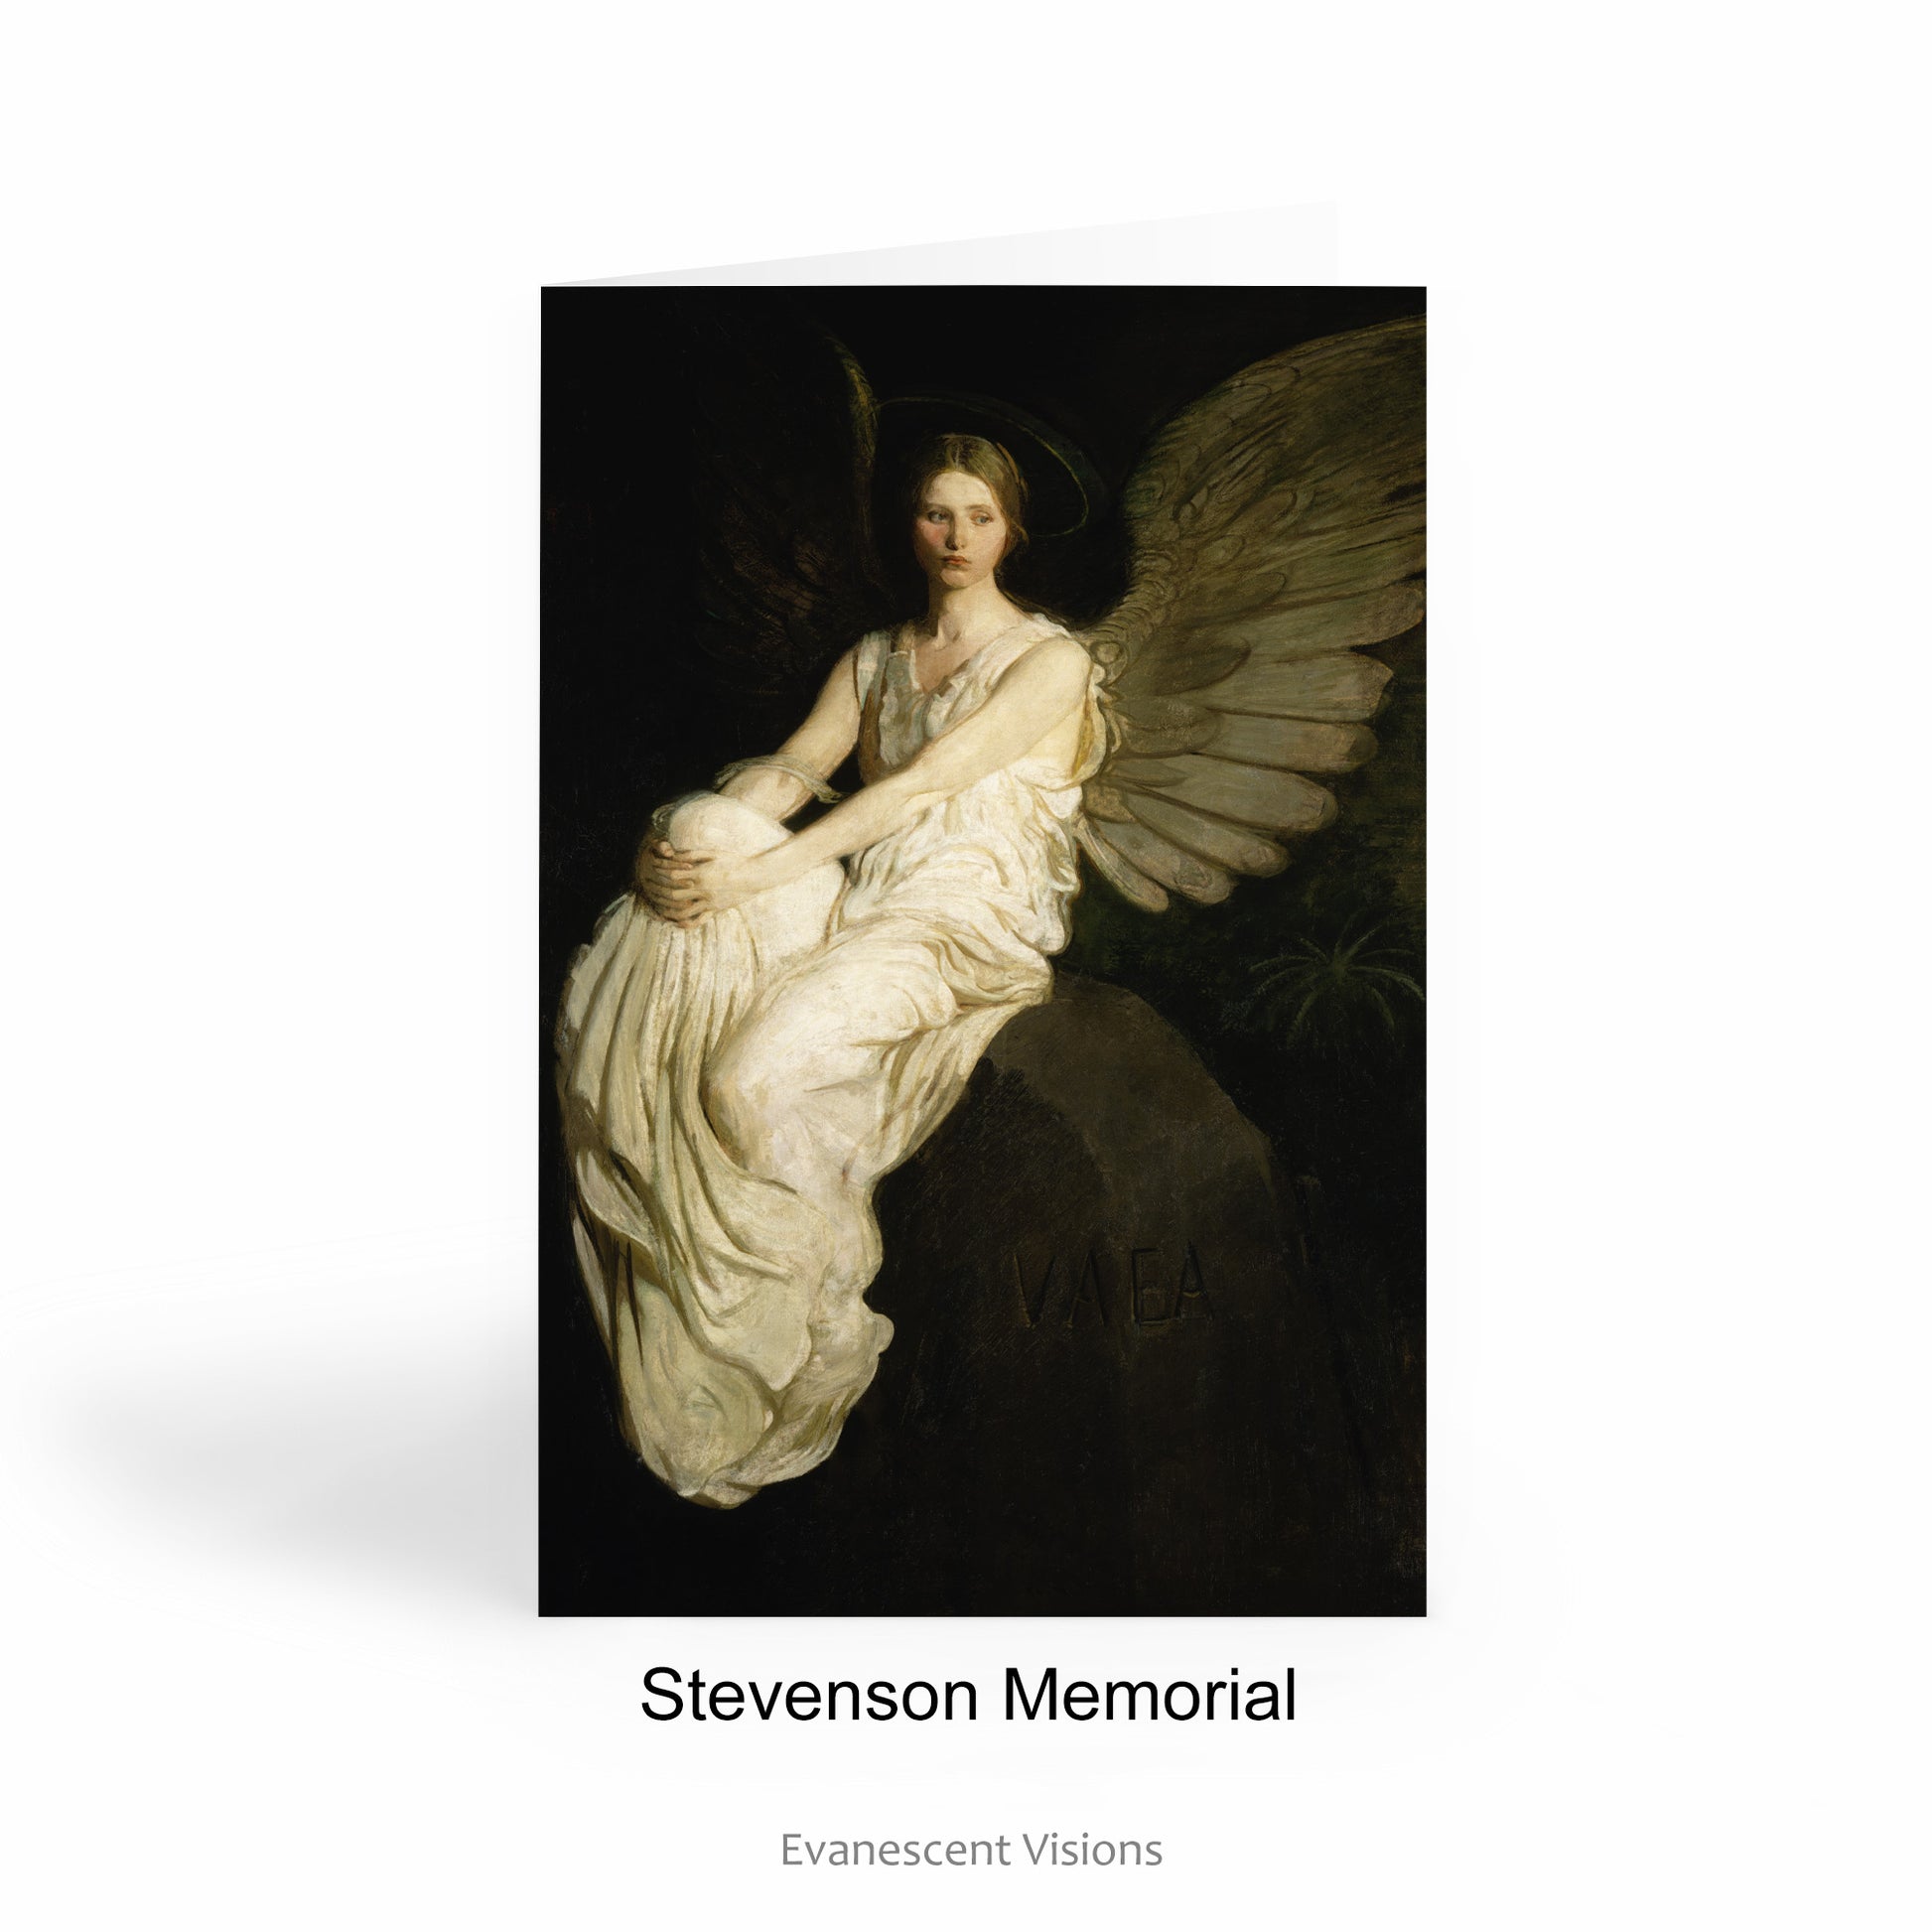 Angel Card with painting 'Stevenson Memorial' by Abbott Handerson Thayer